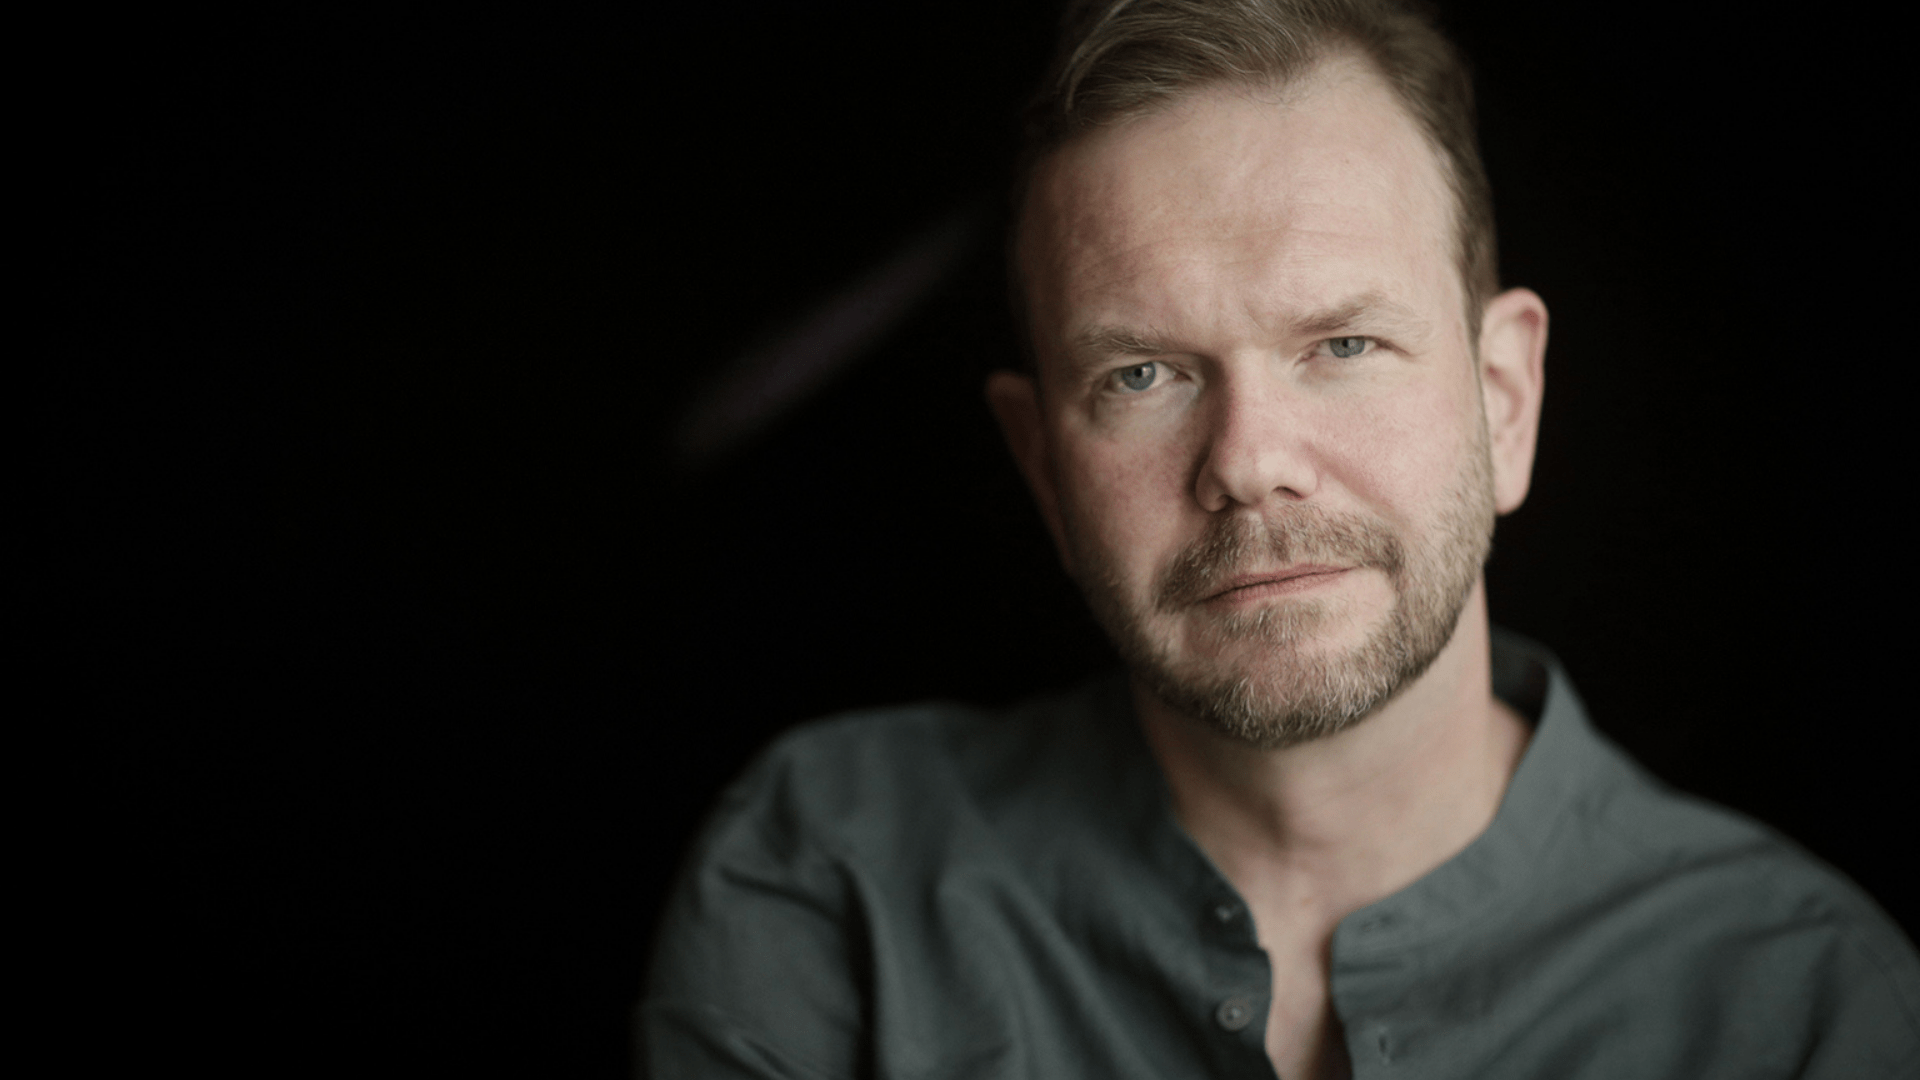 James O'Brien: 'In therapy I felt my armour flaking away' - The Big Issue